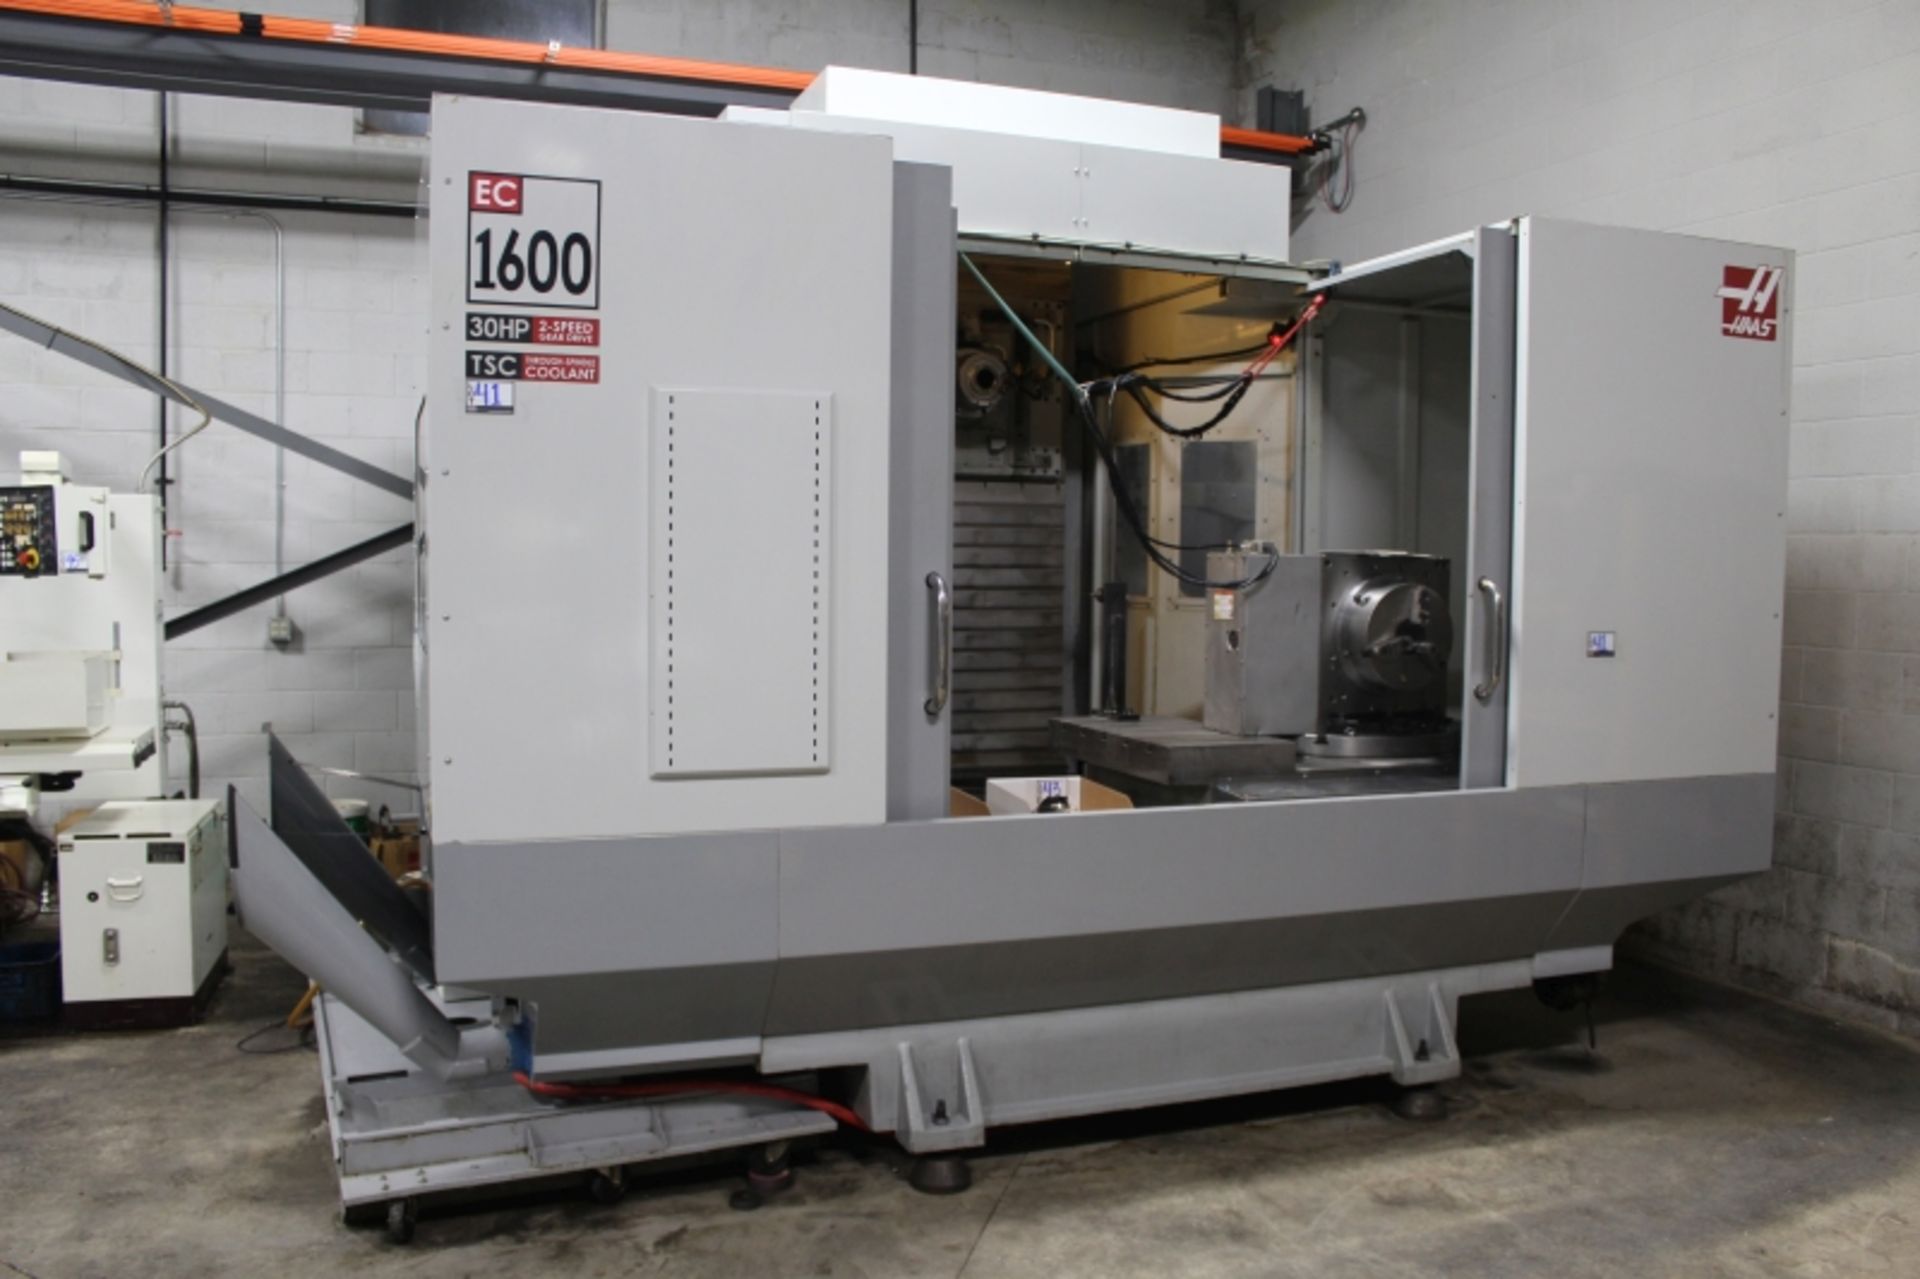 Haas EC-1600-4X, 5-Axis, 64” x 50” x 32” trvls, 7500 RPM, CT50, 30 ATC, CTS, S/N 2052737, New - Image 7 of 13